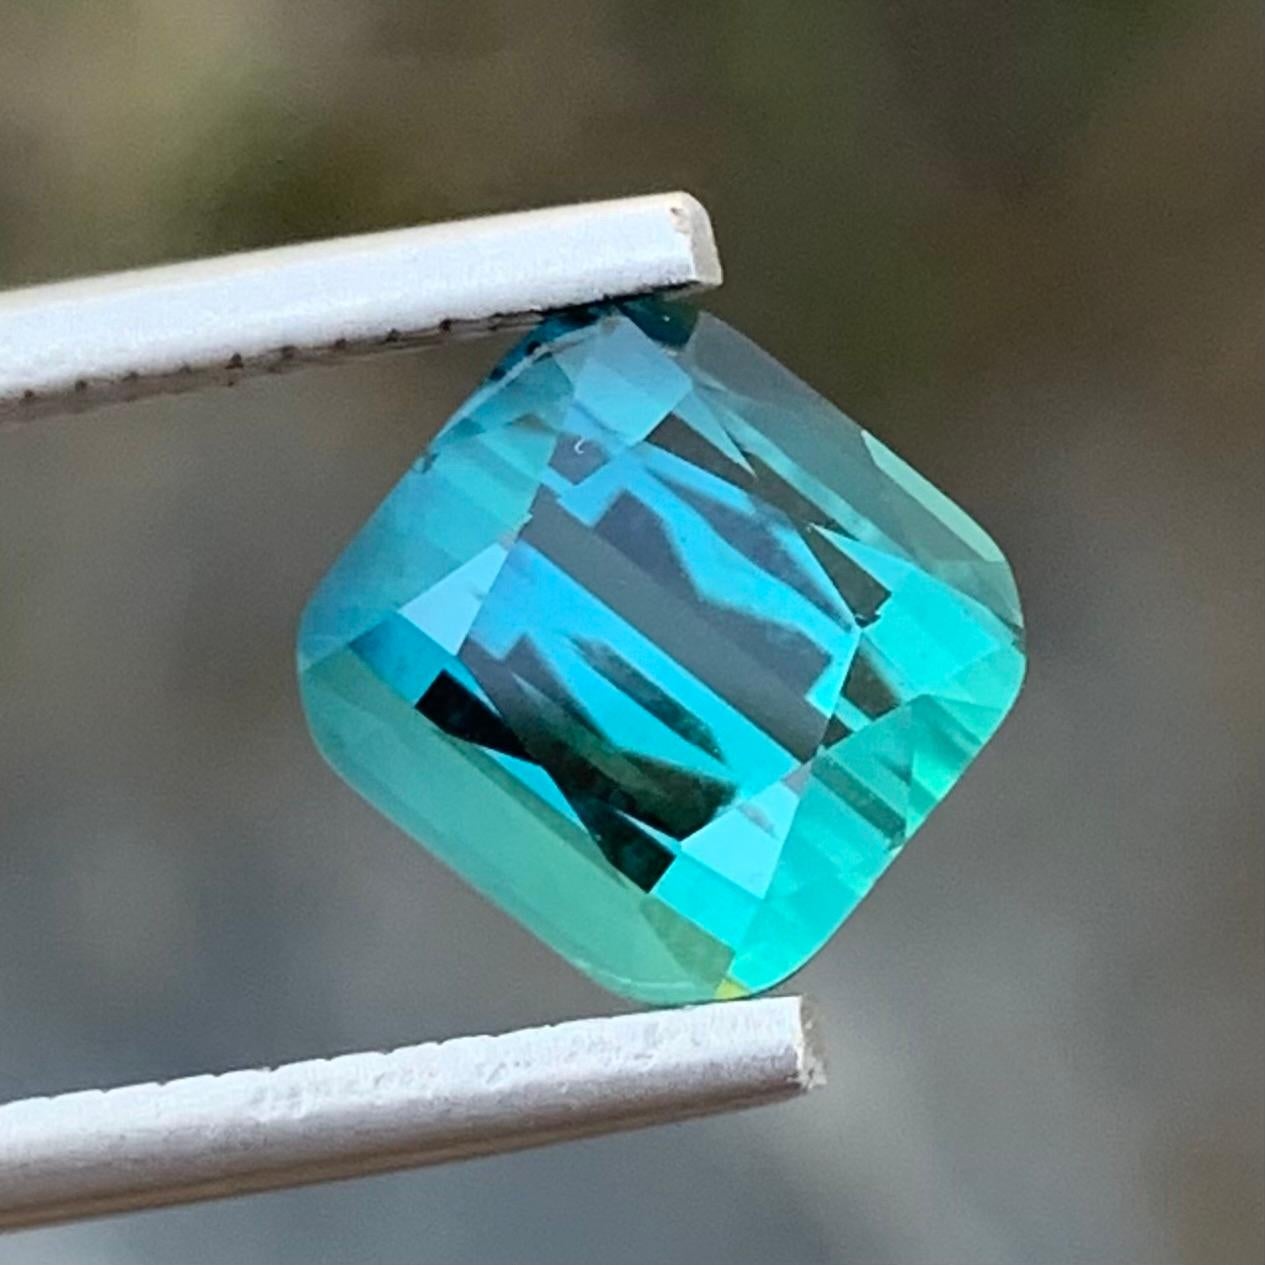 Loose Bi Colour Tourmaline

Weight: 3.70 Carats
Dimension: 8.3 x 8 x 6.5 Mm
Colour: Aqua Blue And Mint Green
Origin: Afghanistan
Certificate: On Demand
Treatment: Non

Tourmaline is a captivating gemstone known for its remarkable variety of colors,